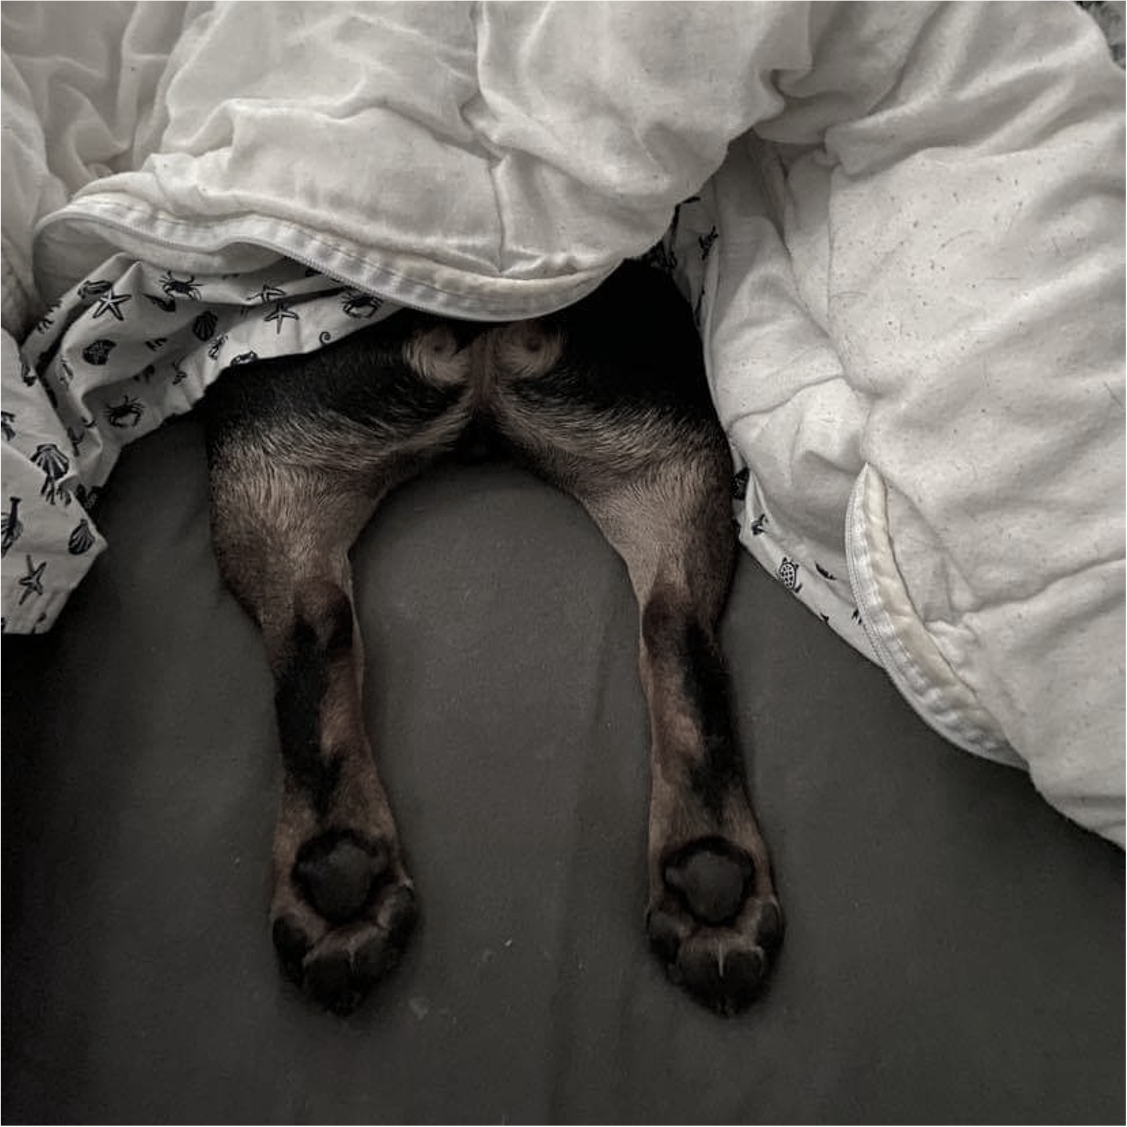 Doggy legs sticking out of bed sheets